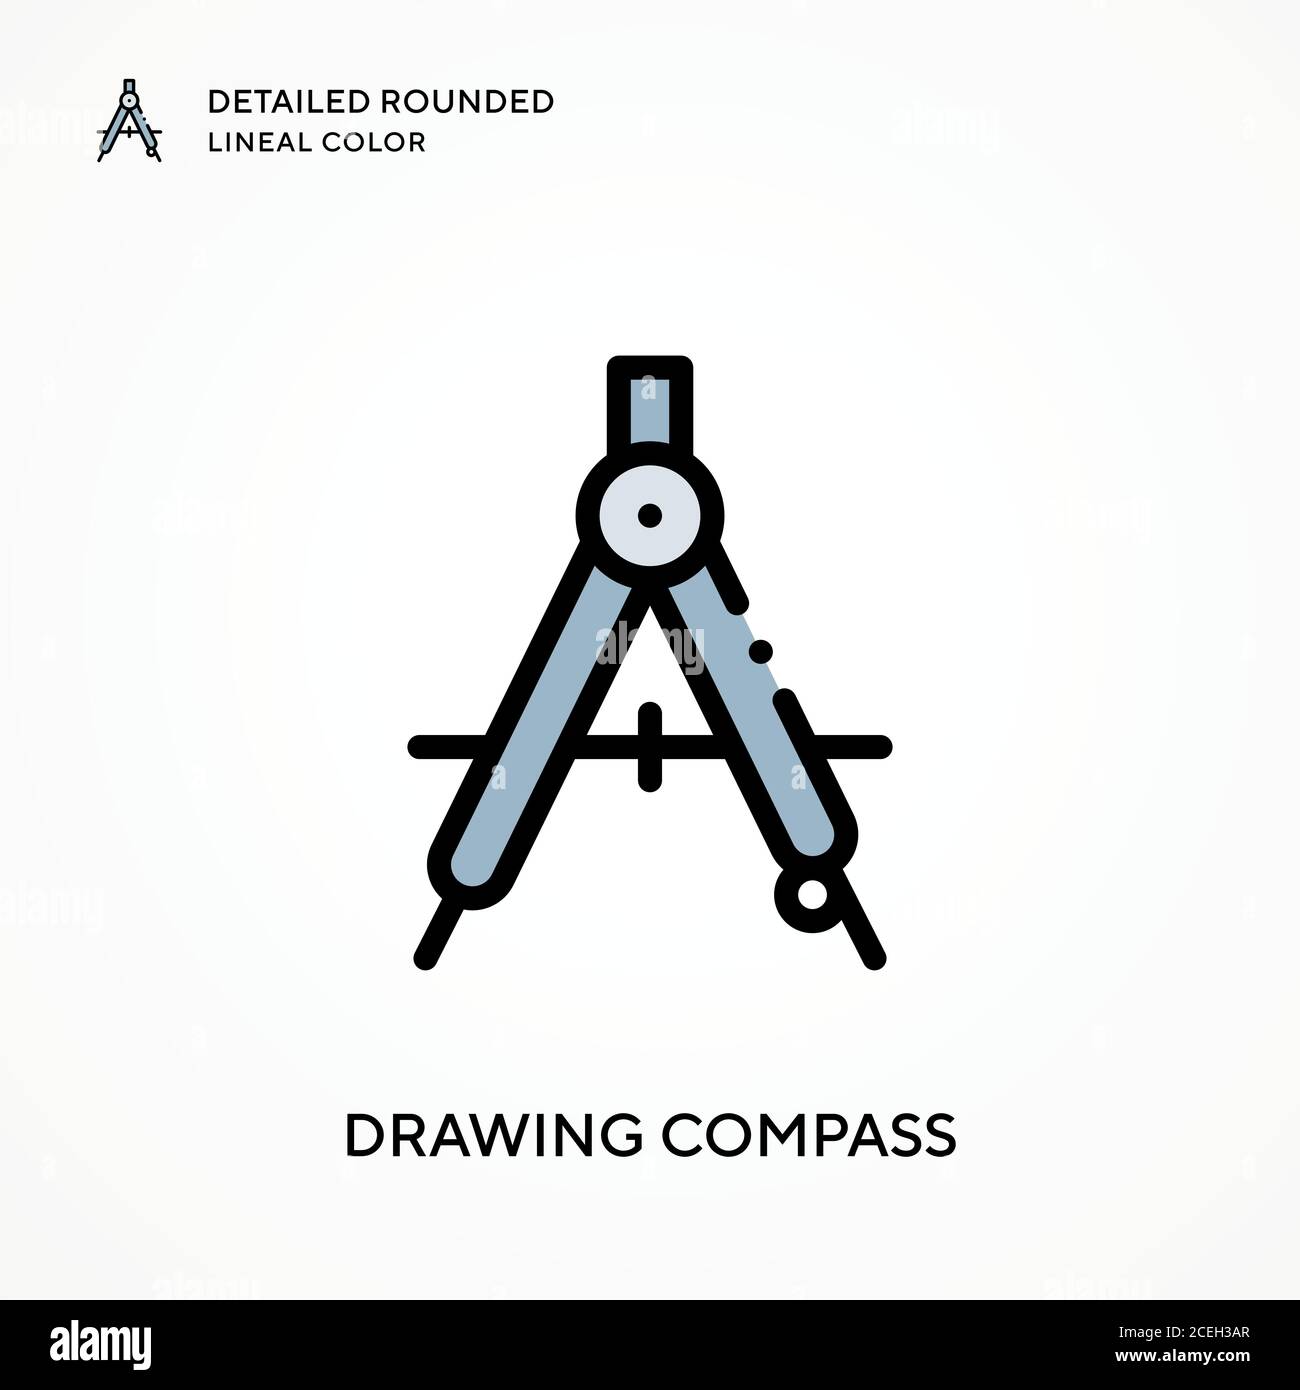 Drawing compass detailed rounded lineal color. Modern vector illustration concepts. Easy to edit and customize. Stock Vector